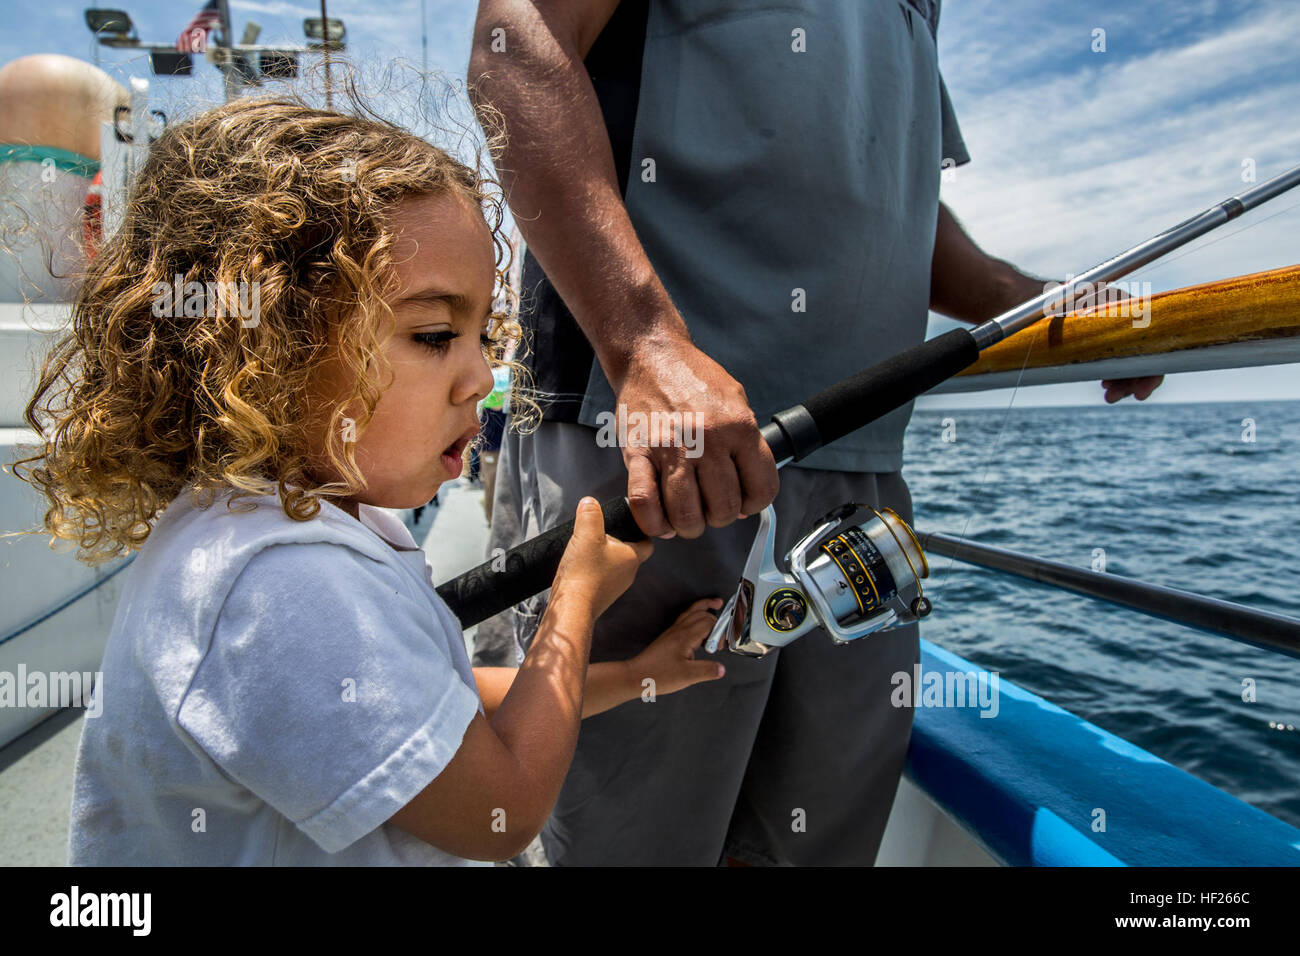 Major, 4, reels in a catch during a youth fishing trip aboard the